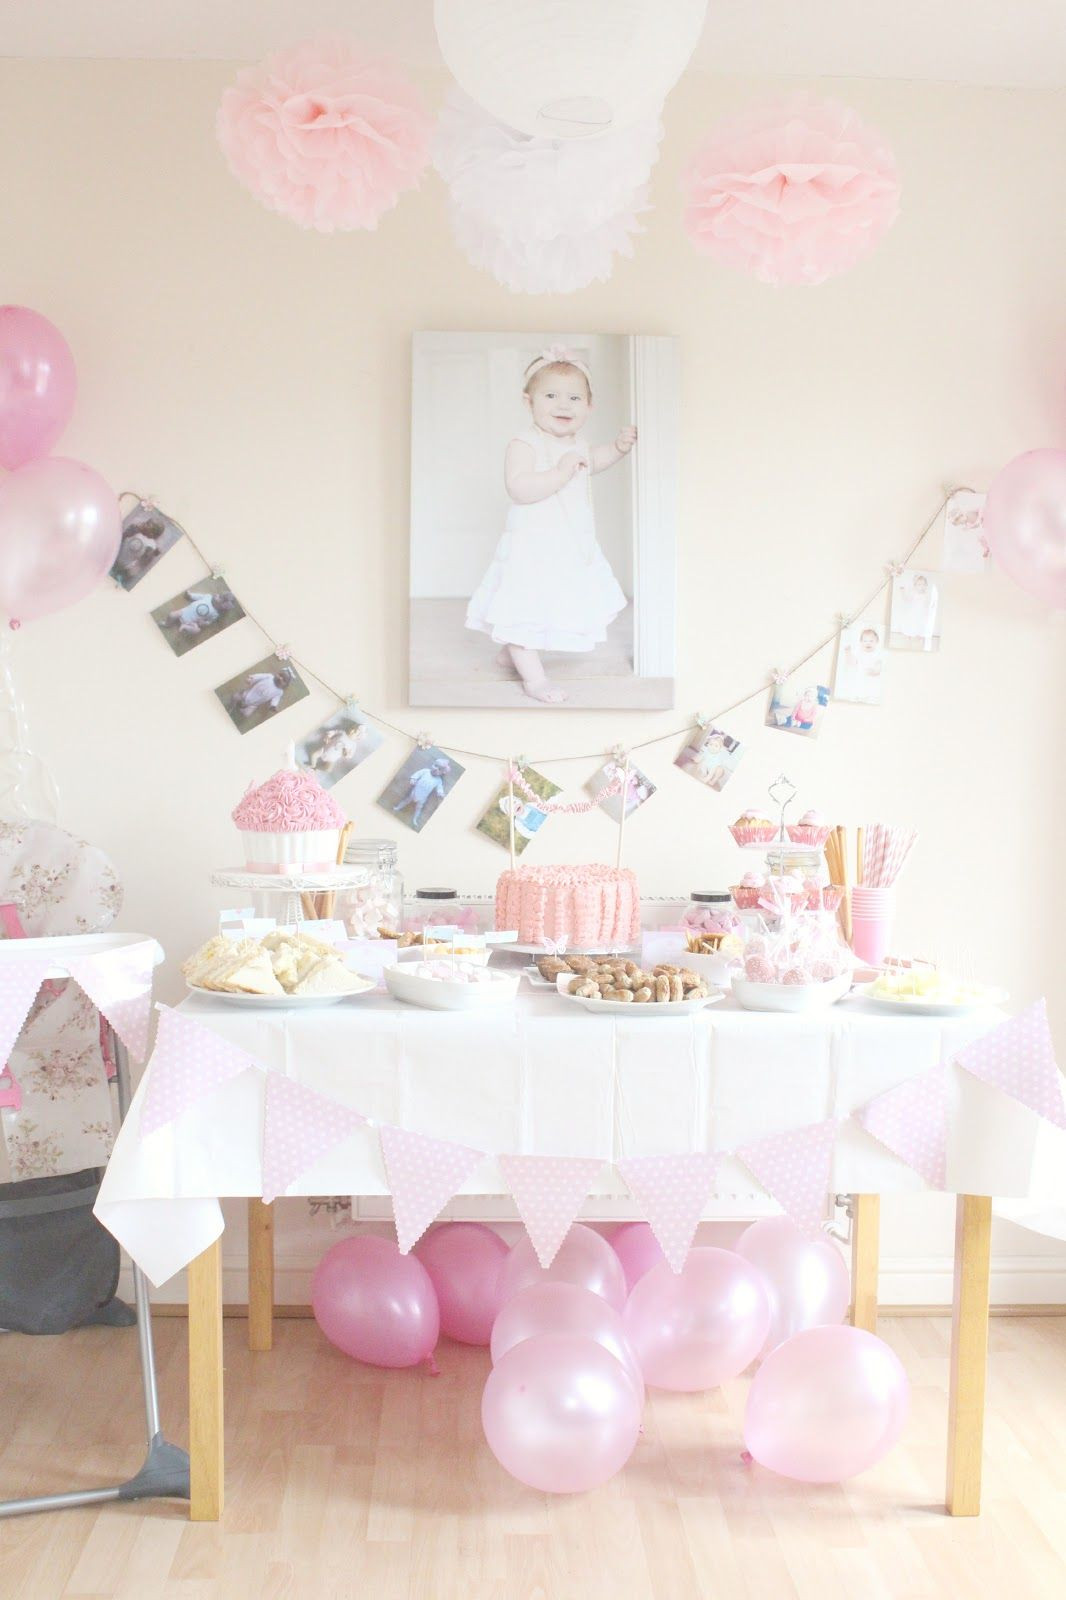 Baby Girl First Birthday Party Decorations
 First Birthday Party & Decor Vintage Princess Inspired